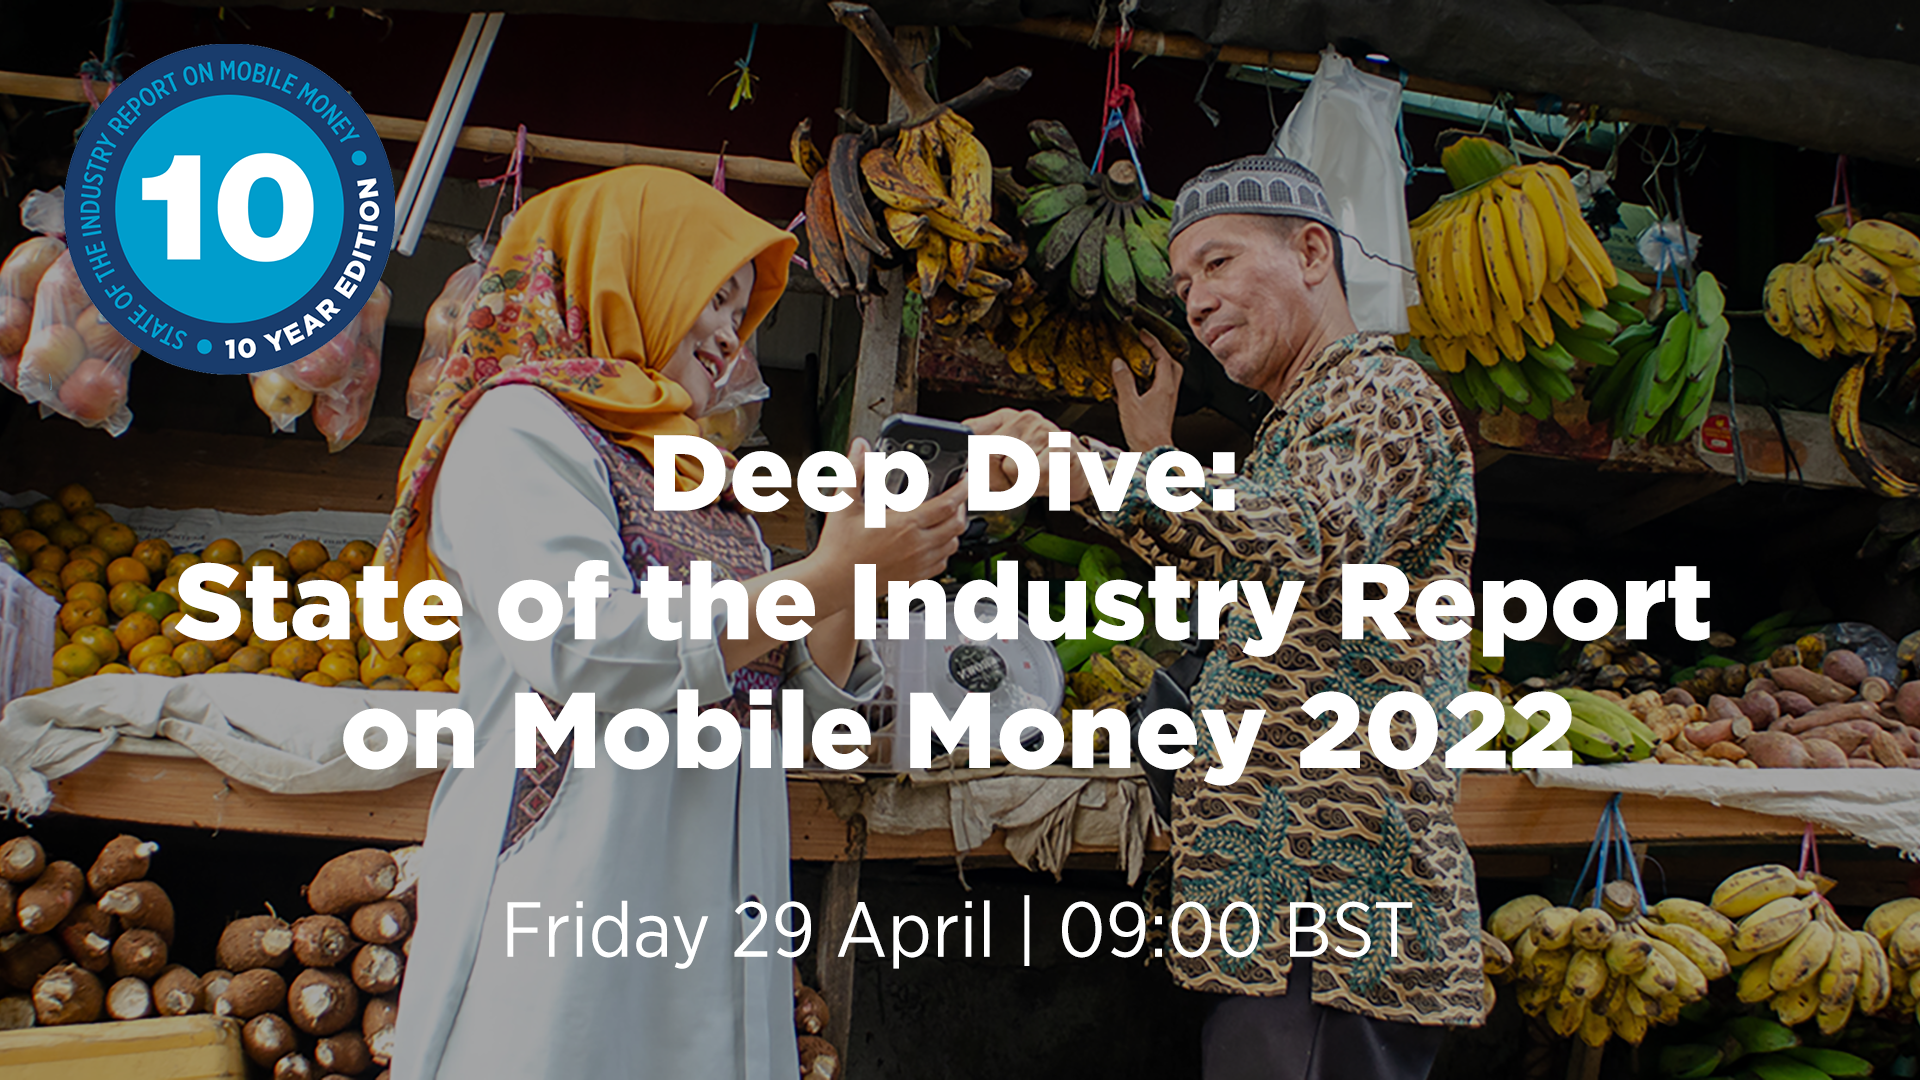 Deep Dive Two: State of the Industry Report on Mobile Money 2022